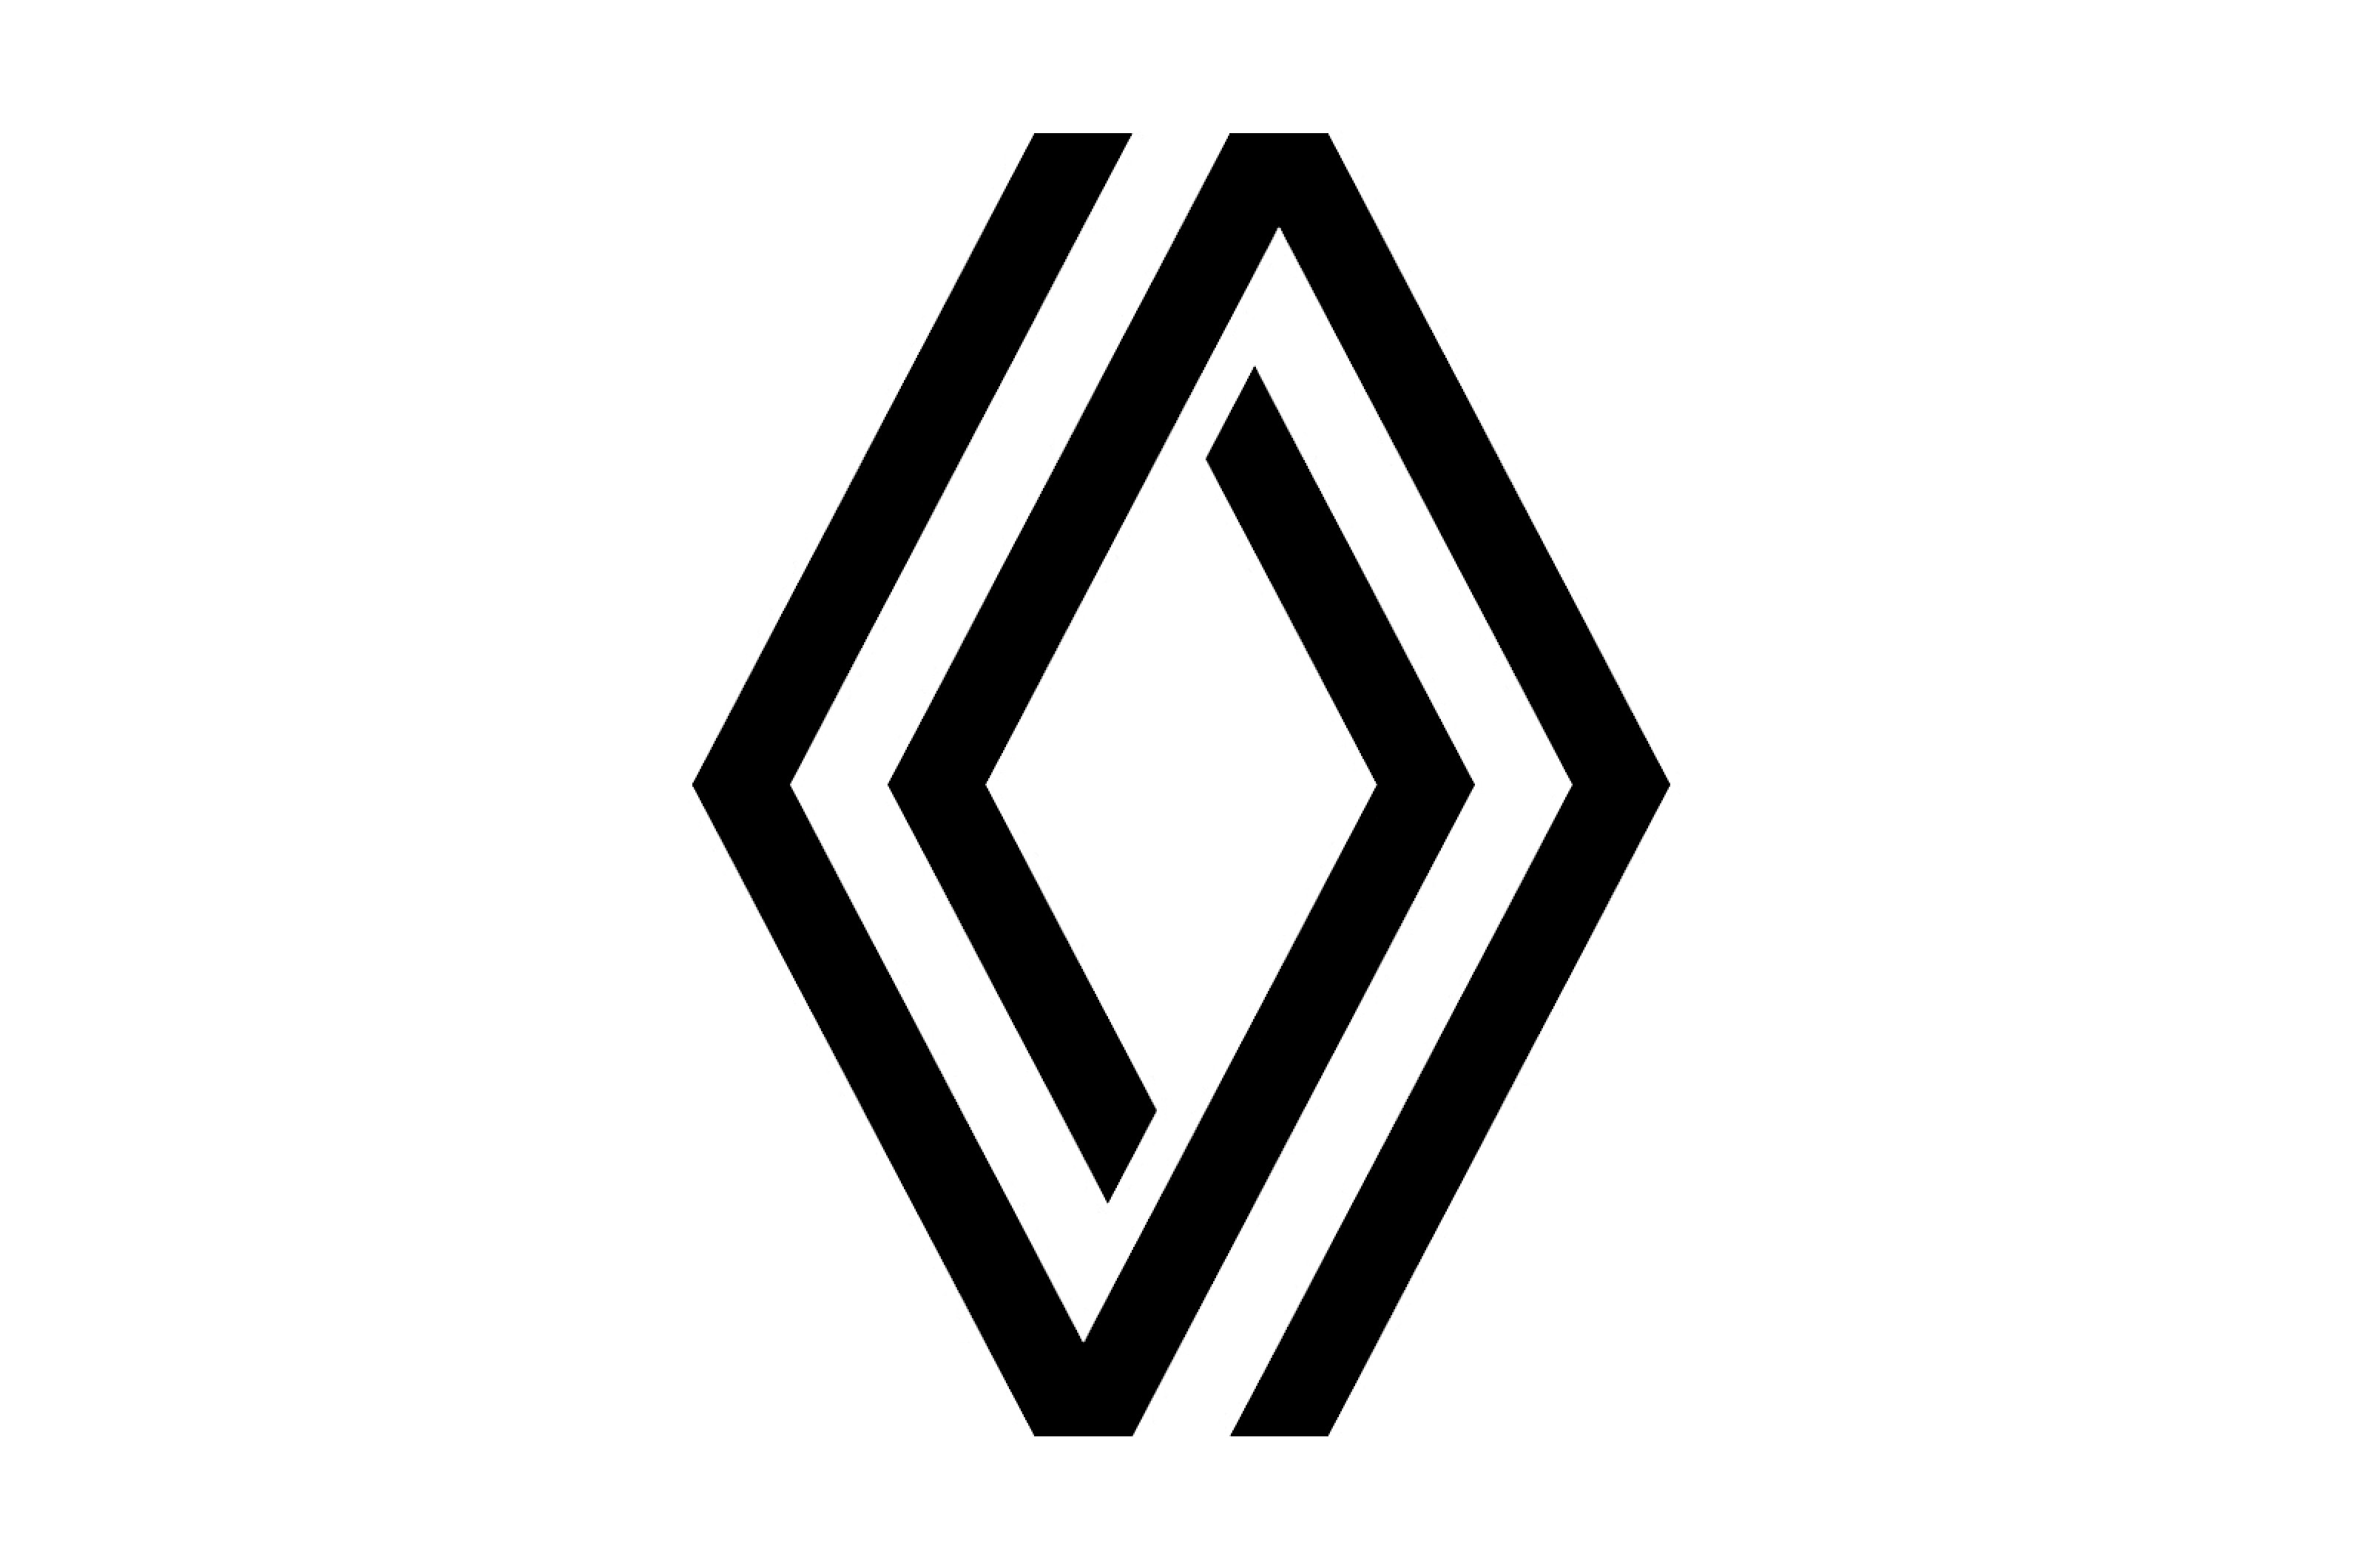 <p>Renault started out with an oval logo and switched to a round one in 1906.</p>  <p>The famous diamond appeared in its original form in 1925. By 1972, it had become so closely associated with the brand that the Renault name, which had featured on logos since 1923, was removed on the basis that it was now superfluous.</p>  <p>The diamond shape has been updated many times, and has had a three-dimensional effect until very recently.</p>  <p>Since the most recent update in 2021, it has looked much flatter, as so many do these days. It now consists of nothing more than two black lines, each of them with three changes of direction to maintain the overall diamond effect.</p>